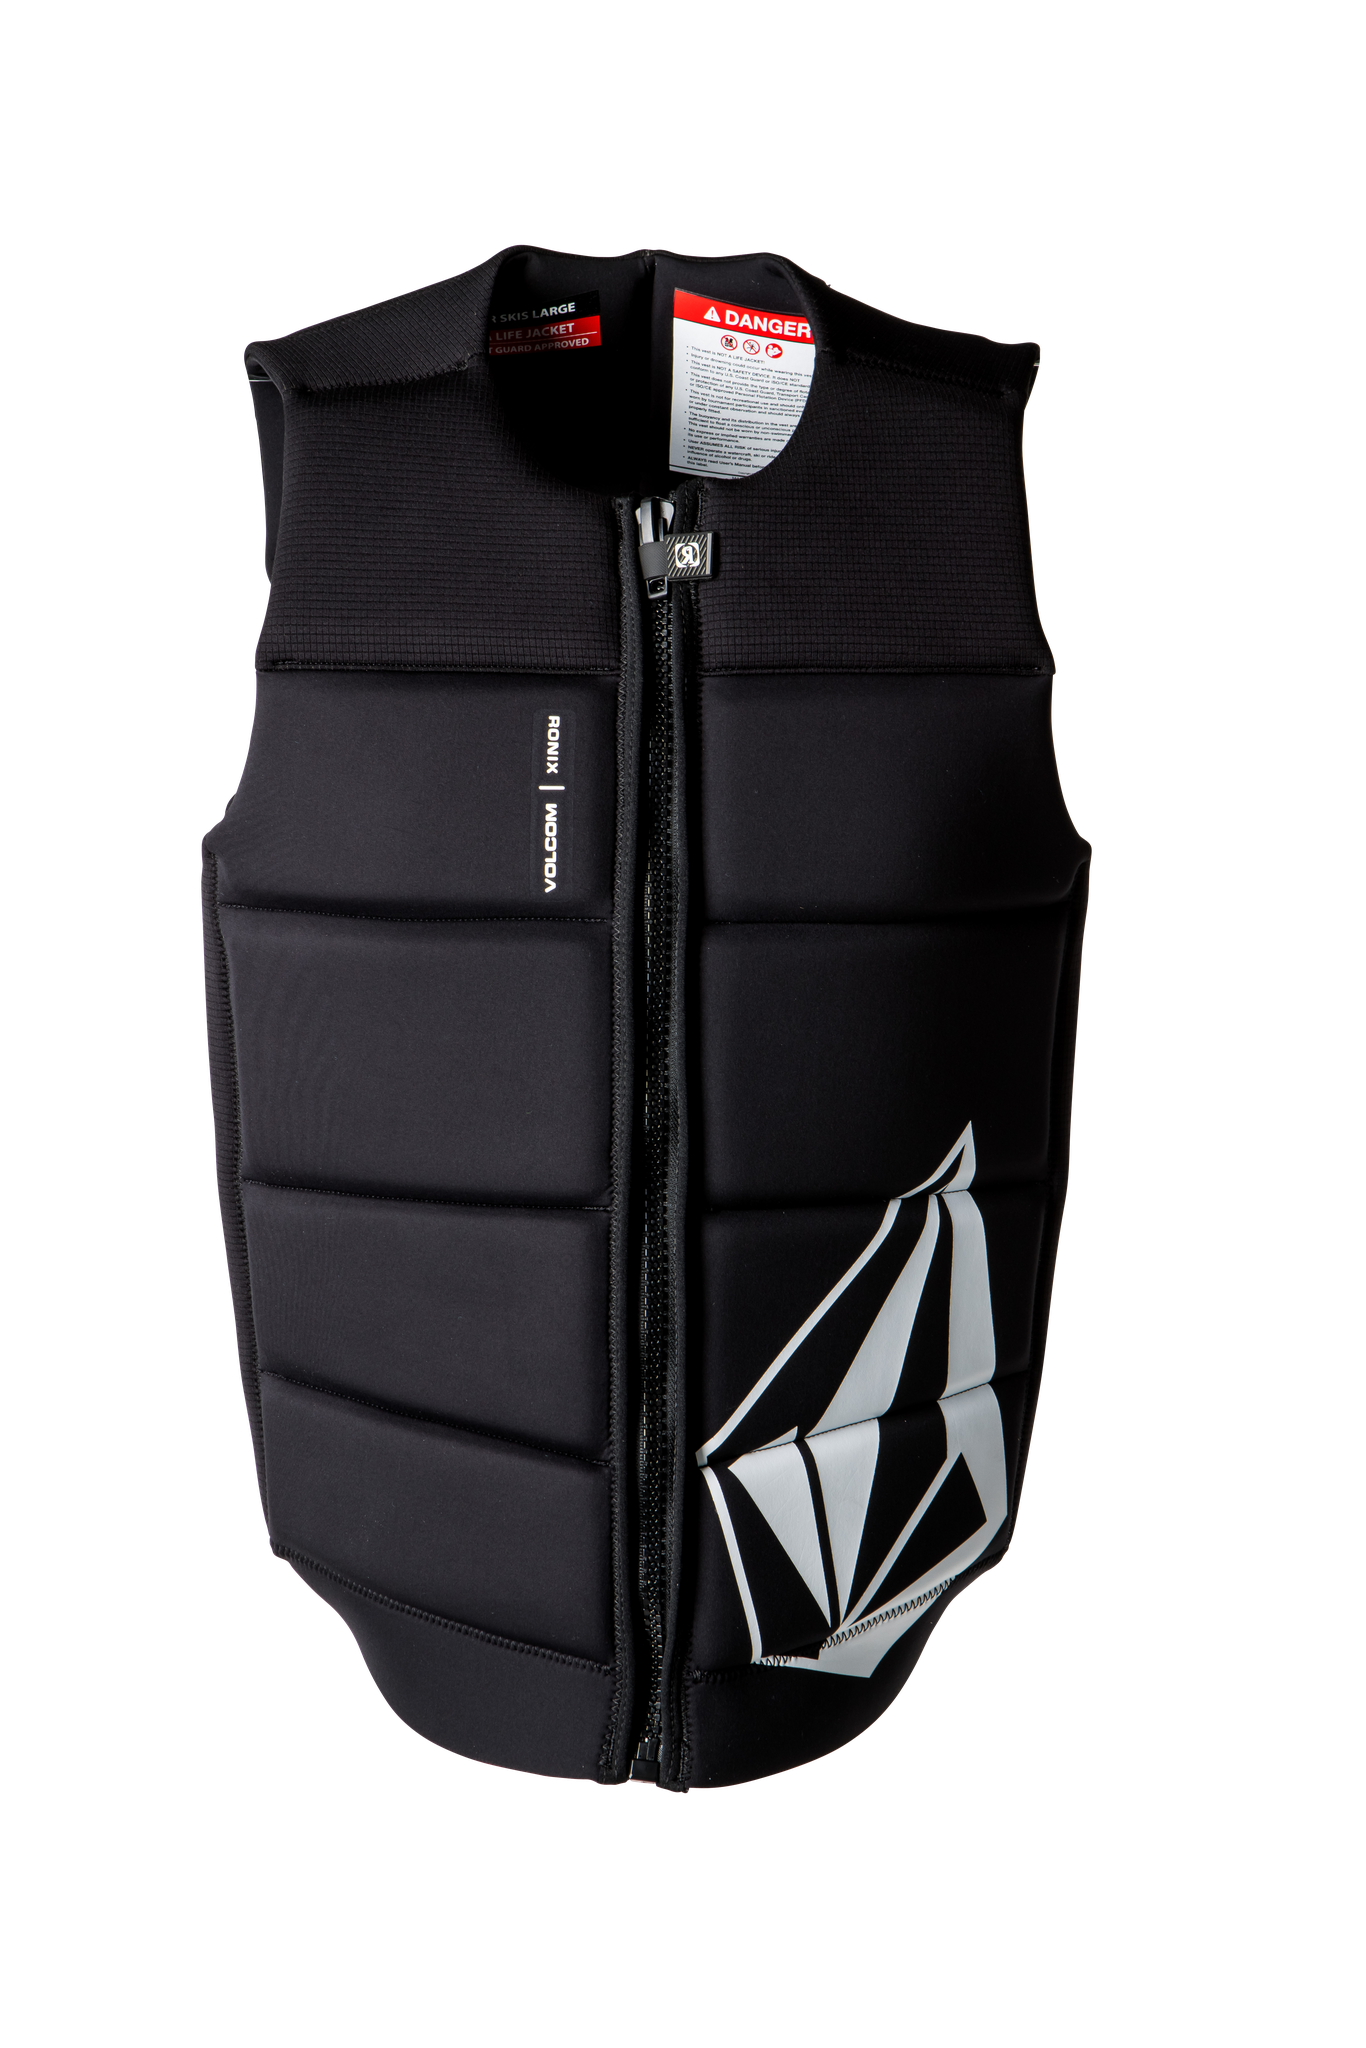 A lightweight Ronix 2024 Volcom Men's CE Impact Vest with the Ronix logo on it.